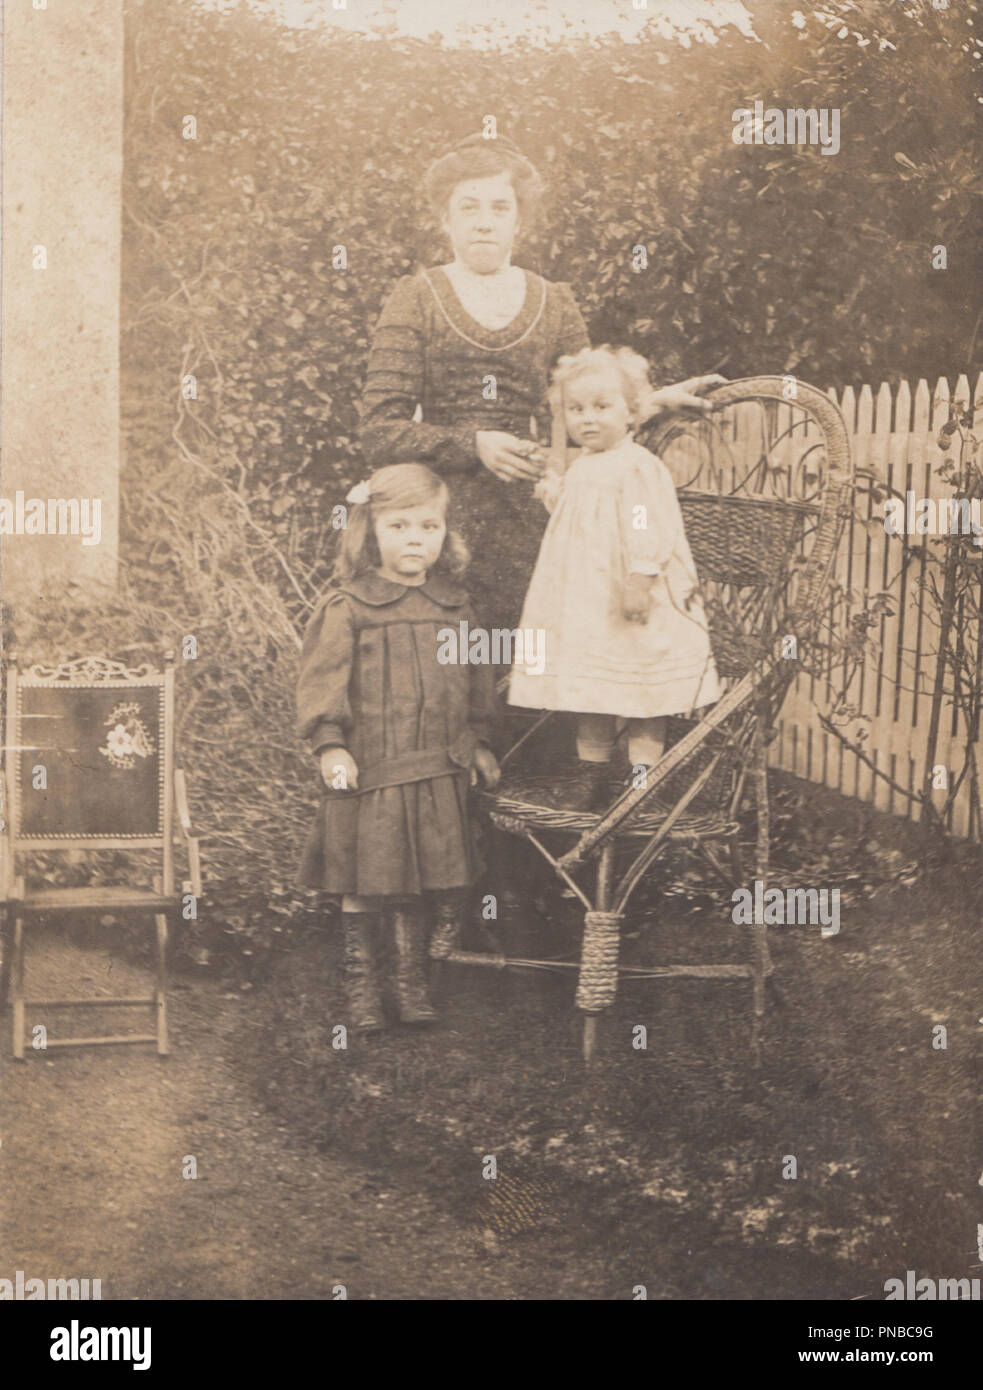 * Vintage Shipton Moyne Photograph of Ethel Banfield and Her Two Children Grace and Dubs. Stock Photo